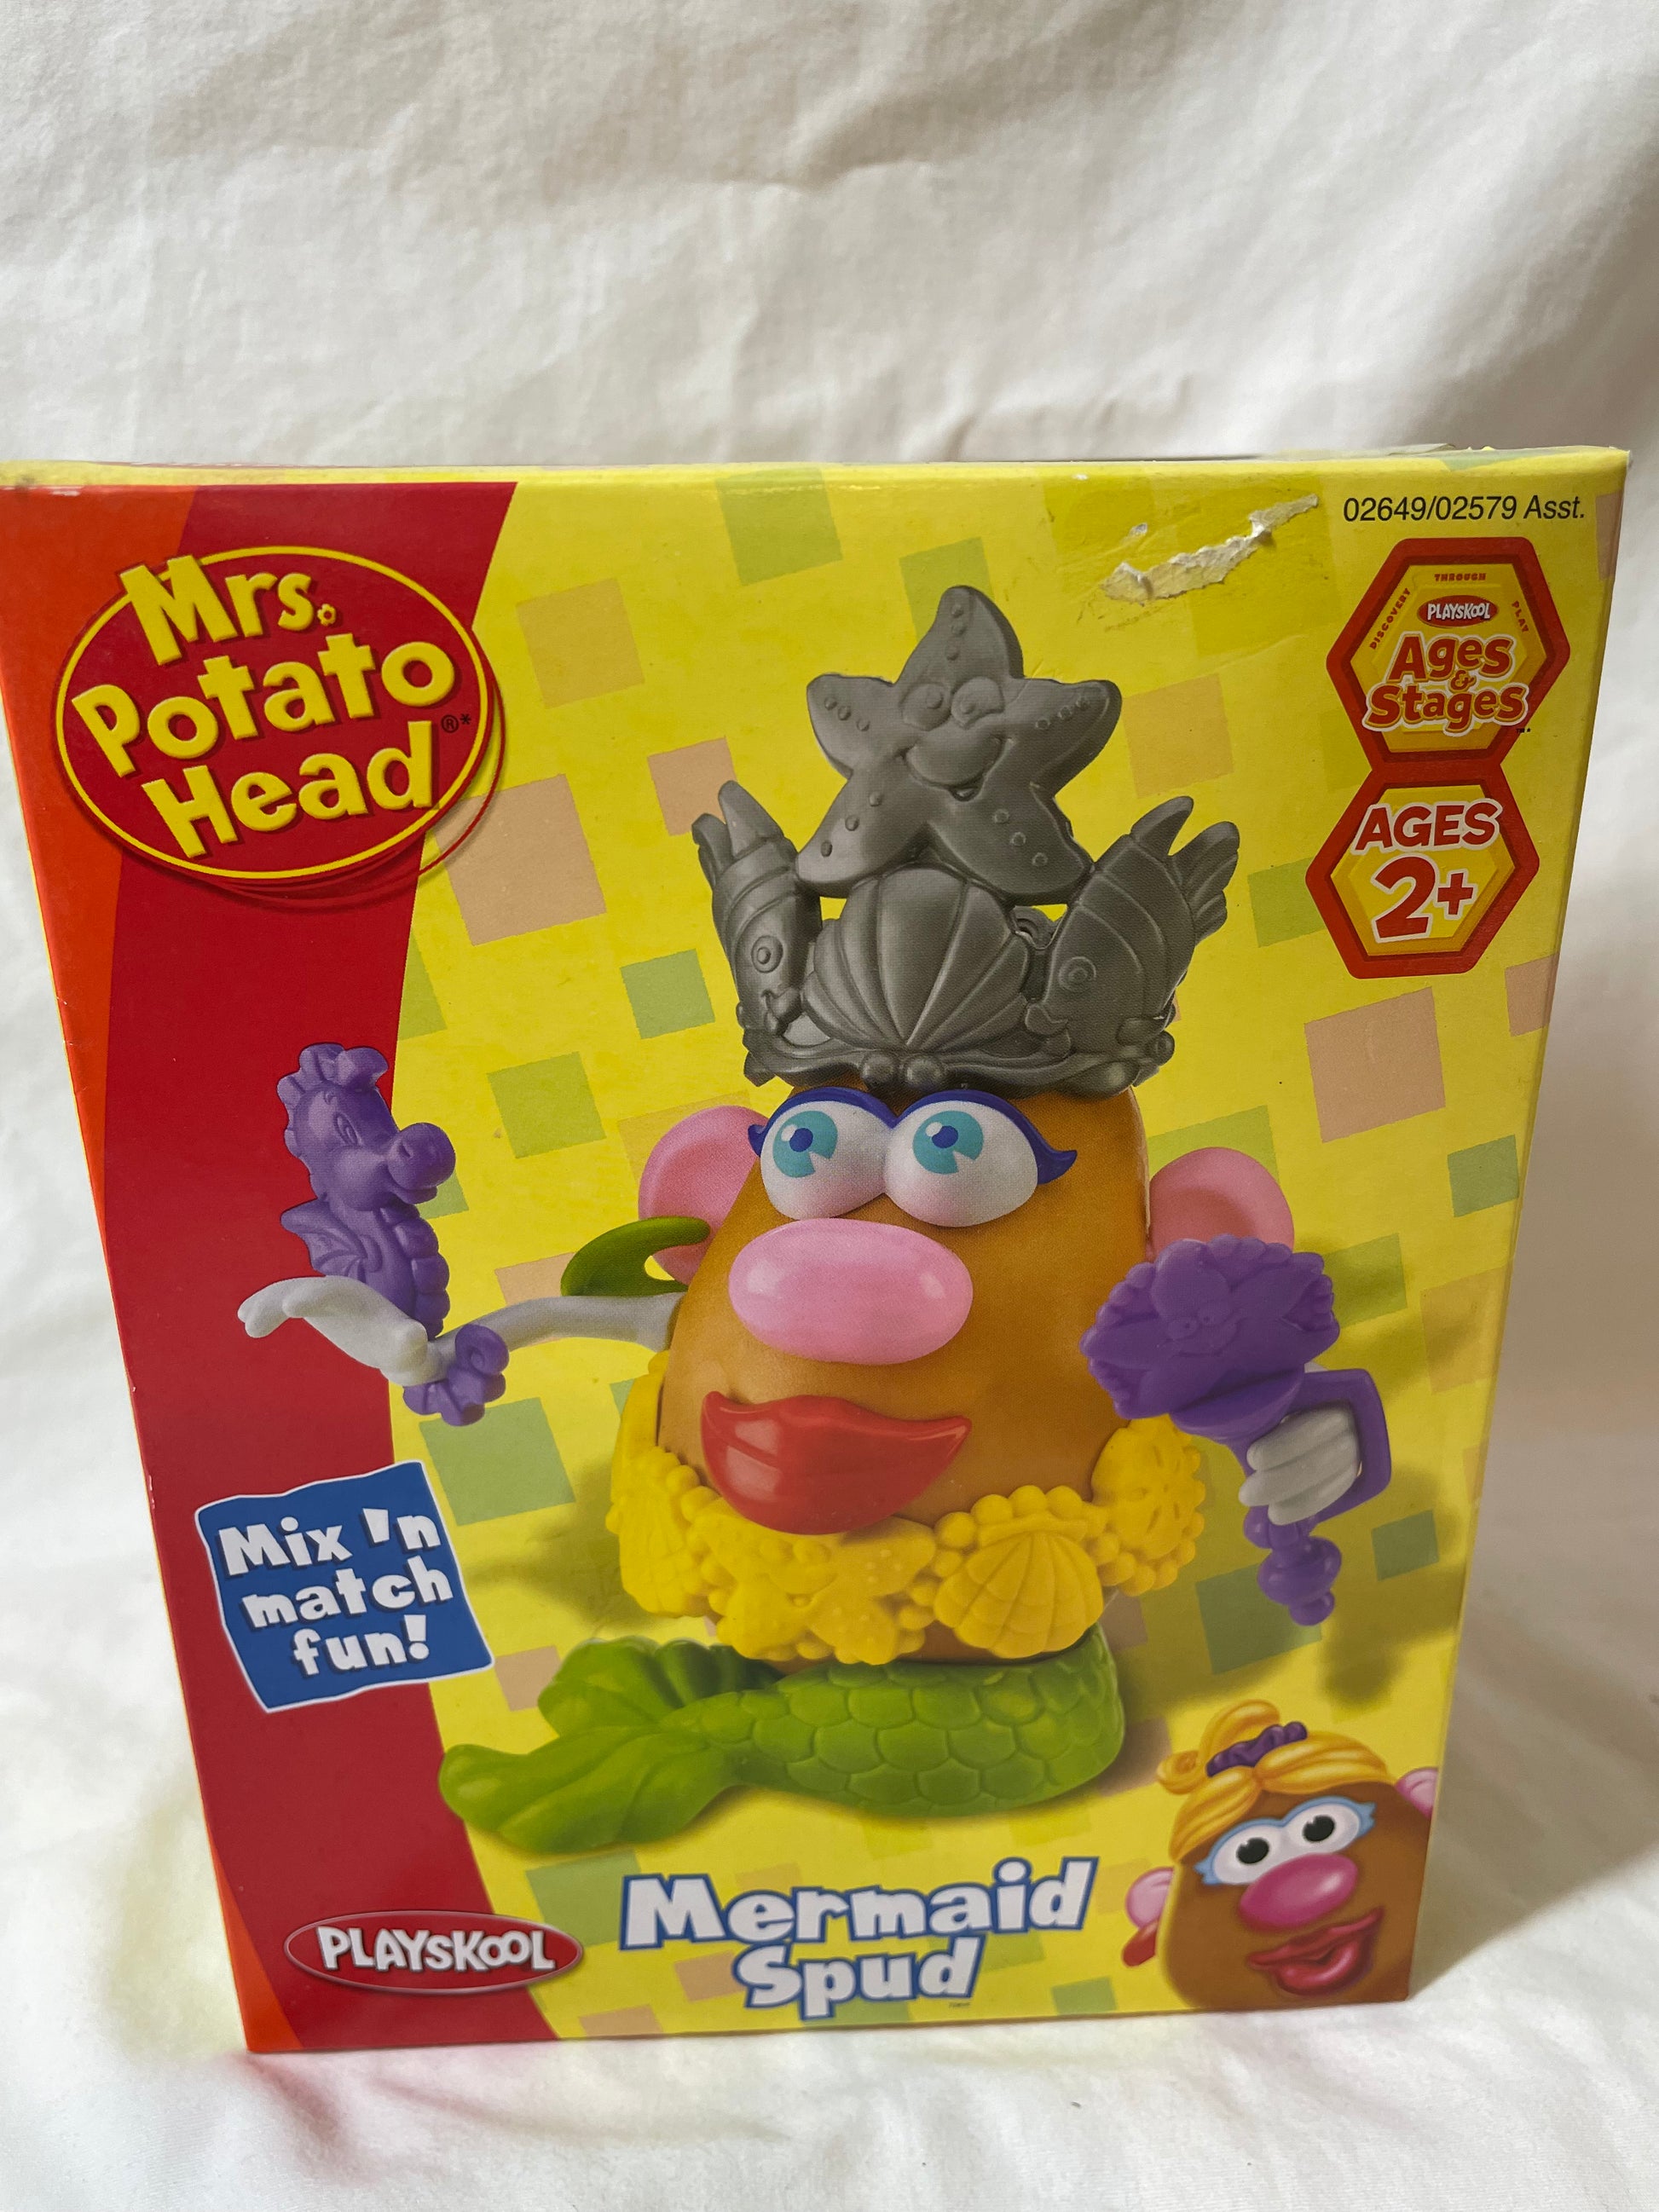  Potato Head Mrs. Potato Head Classic Toy For Kids Ages 2 and  Up, Includes 12 Parts and Pieces to Create Funny Faces : Toys & Games